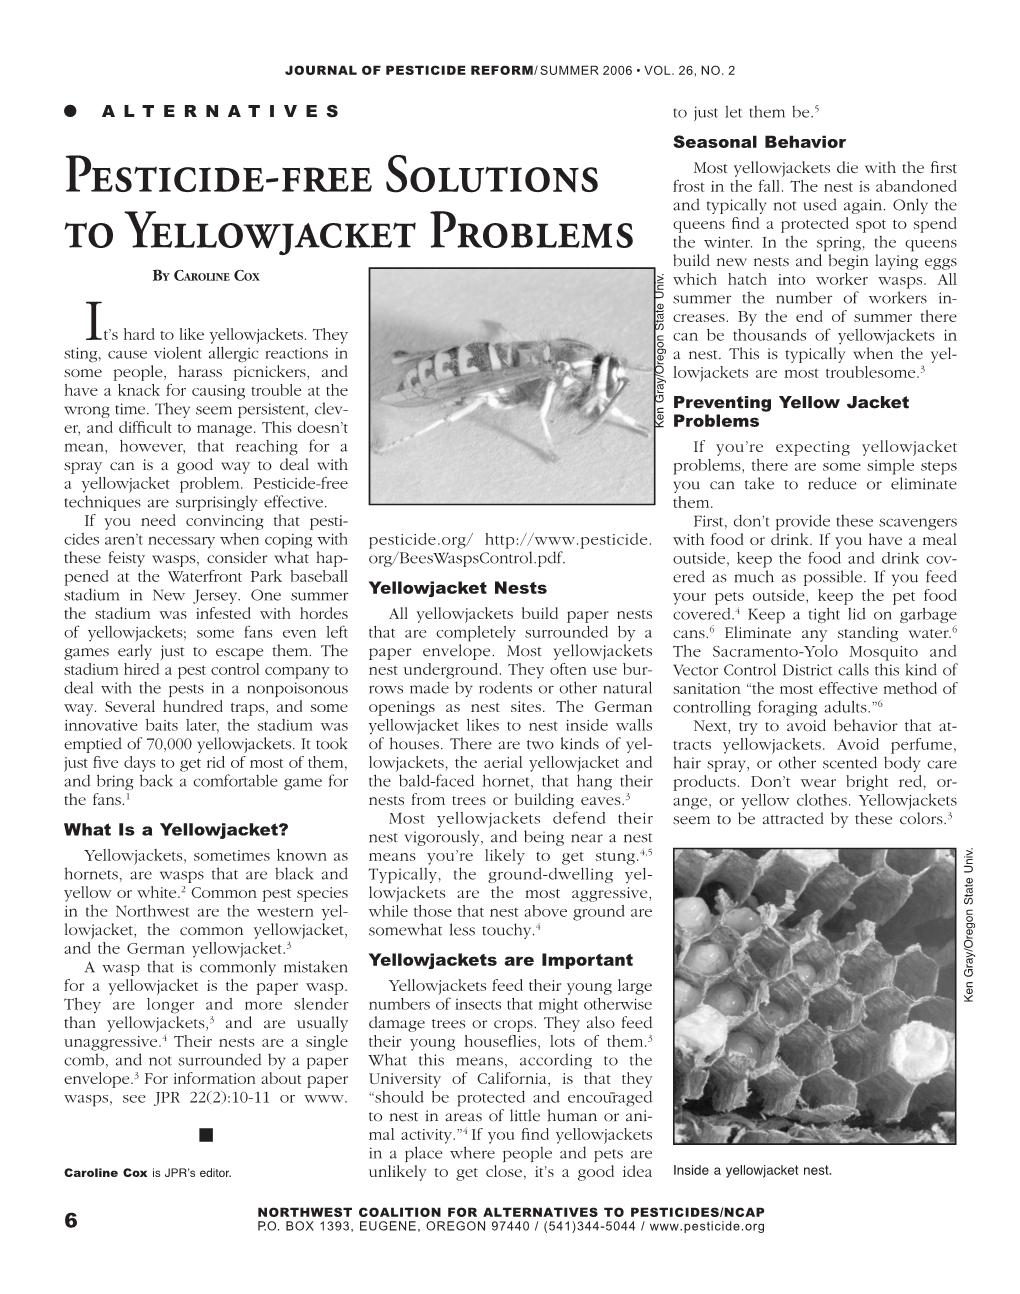 Pesticide-Free Solutions to Yellowjacket Problems